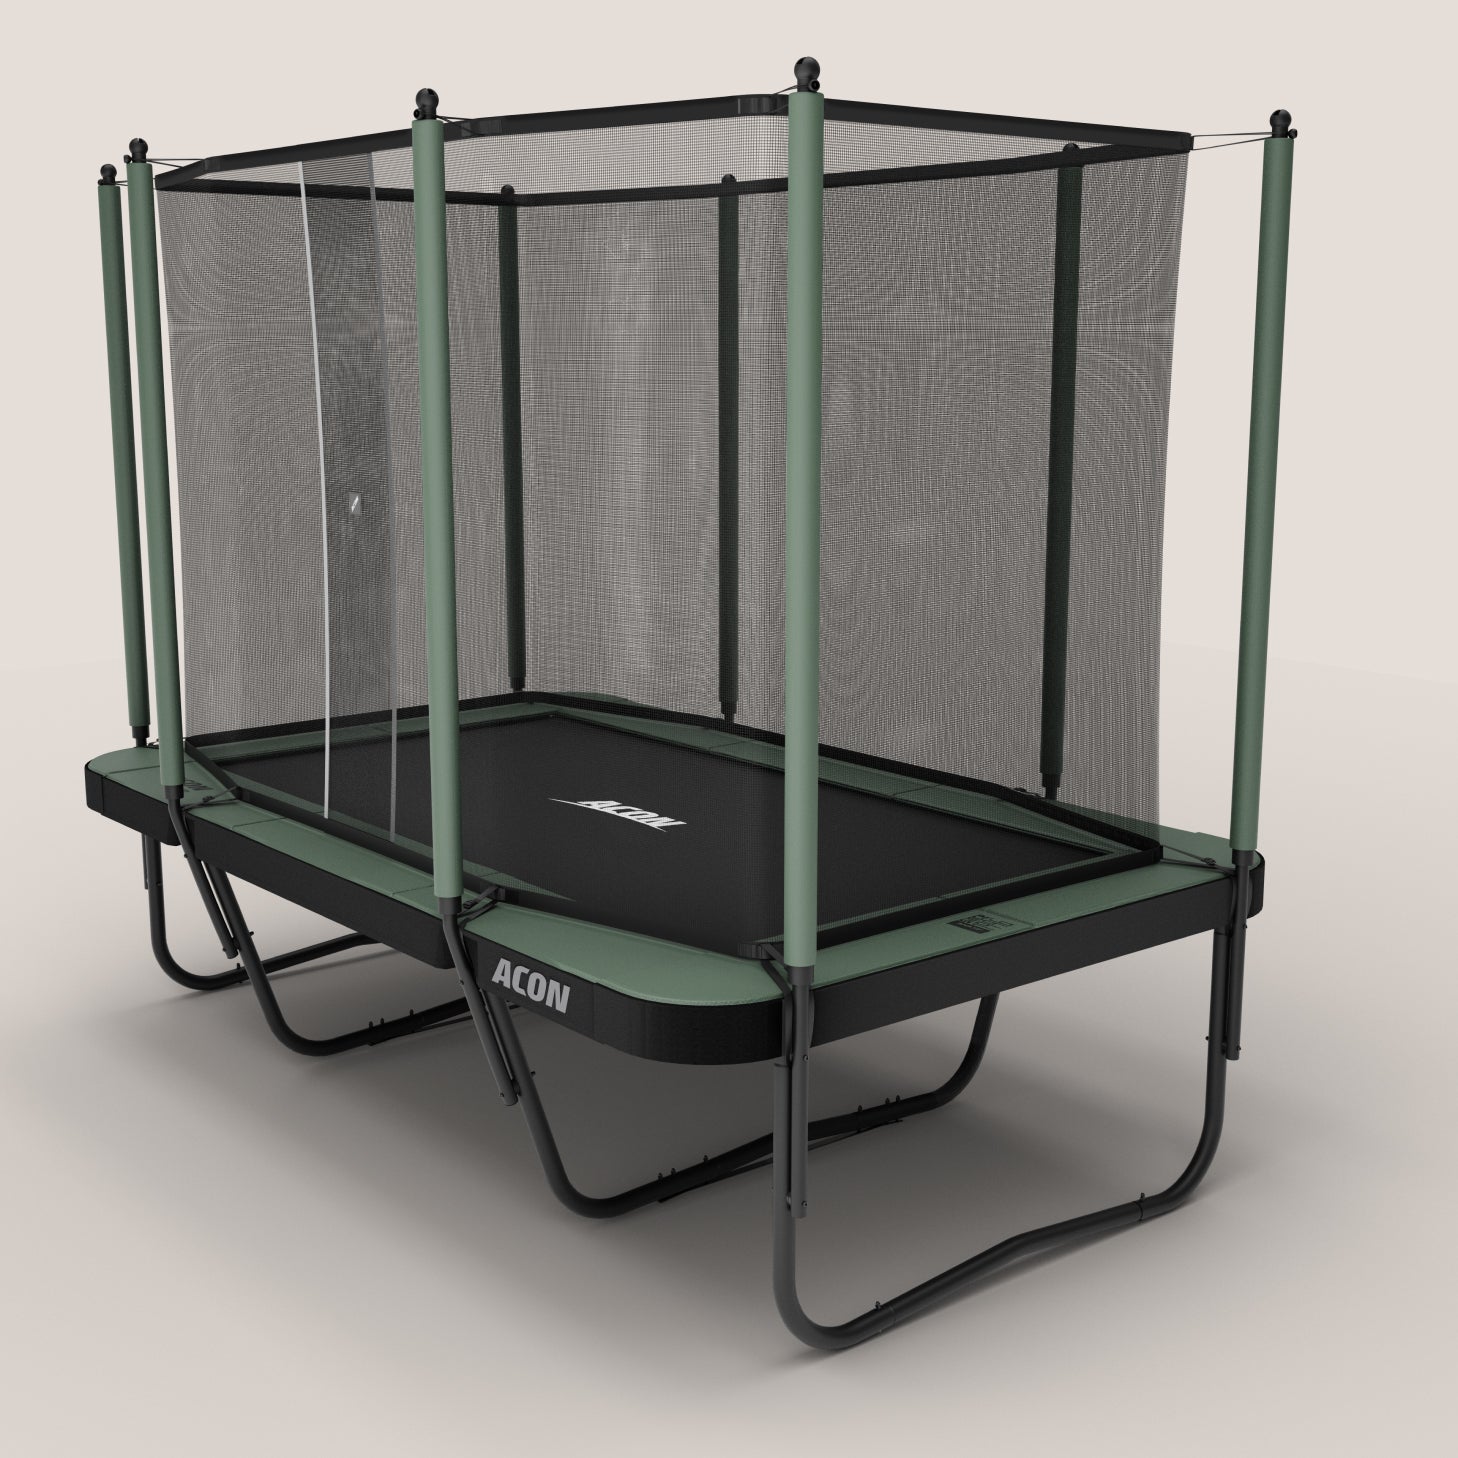 Acon Air 16 Sport HD Trampoline with net assembled on a beige background. The trampoline mat, frame and enclosure net are black and the padding for springs and poles are green 